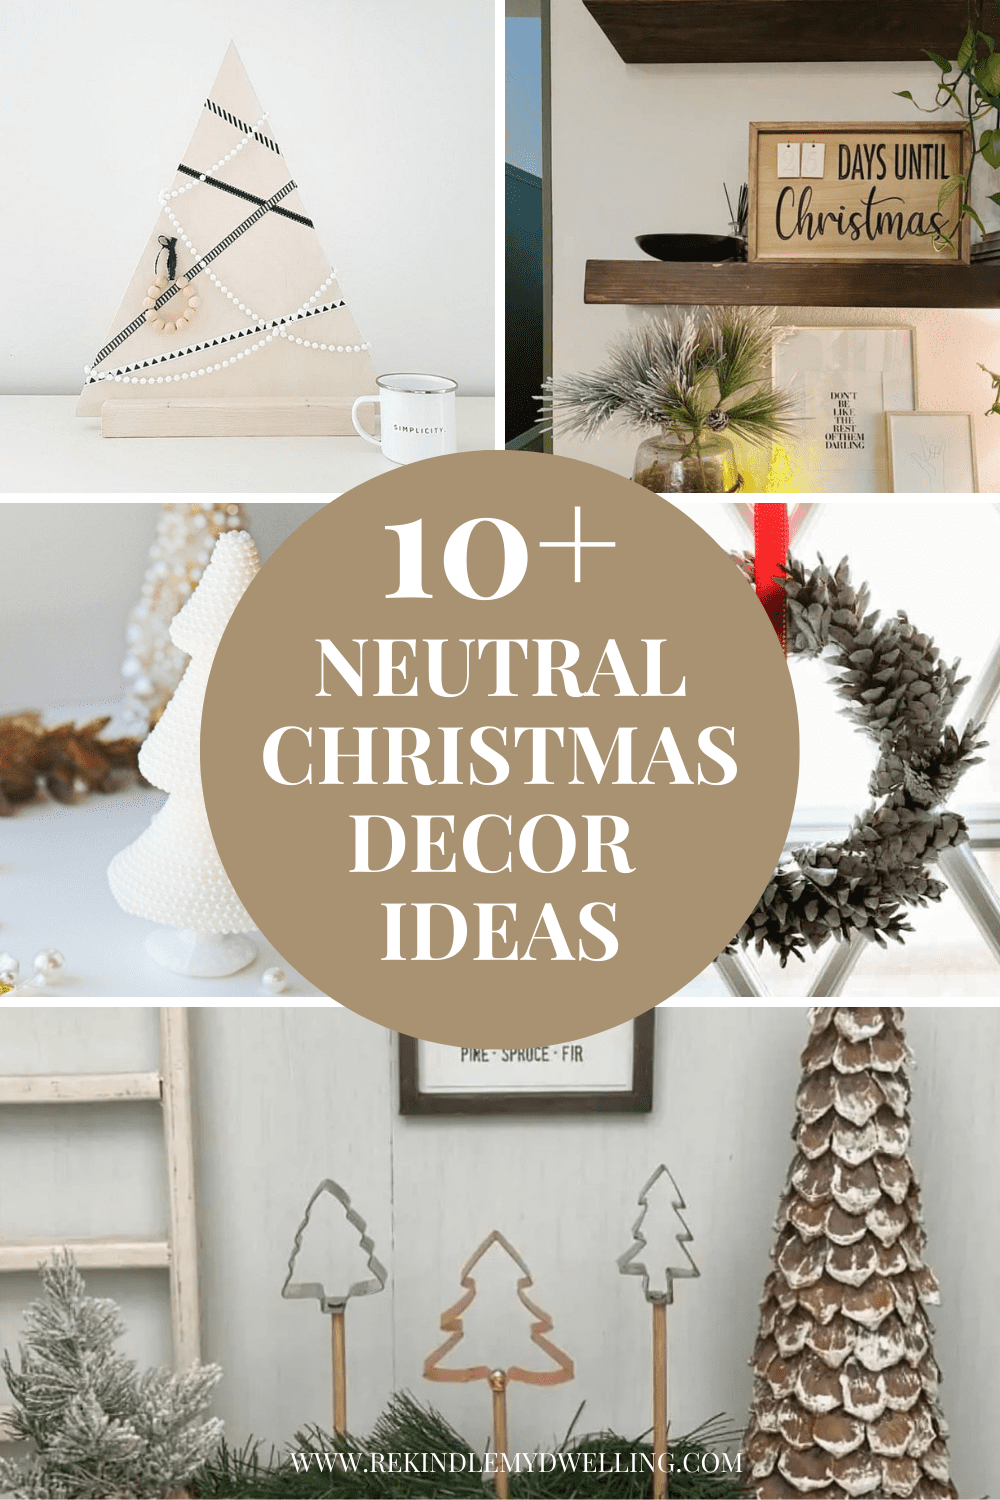 Collage of neutral Christmas decor ideas with text overlay.